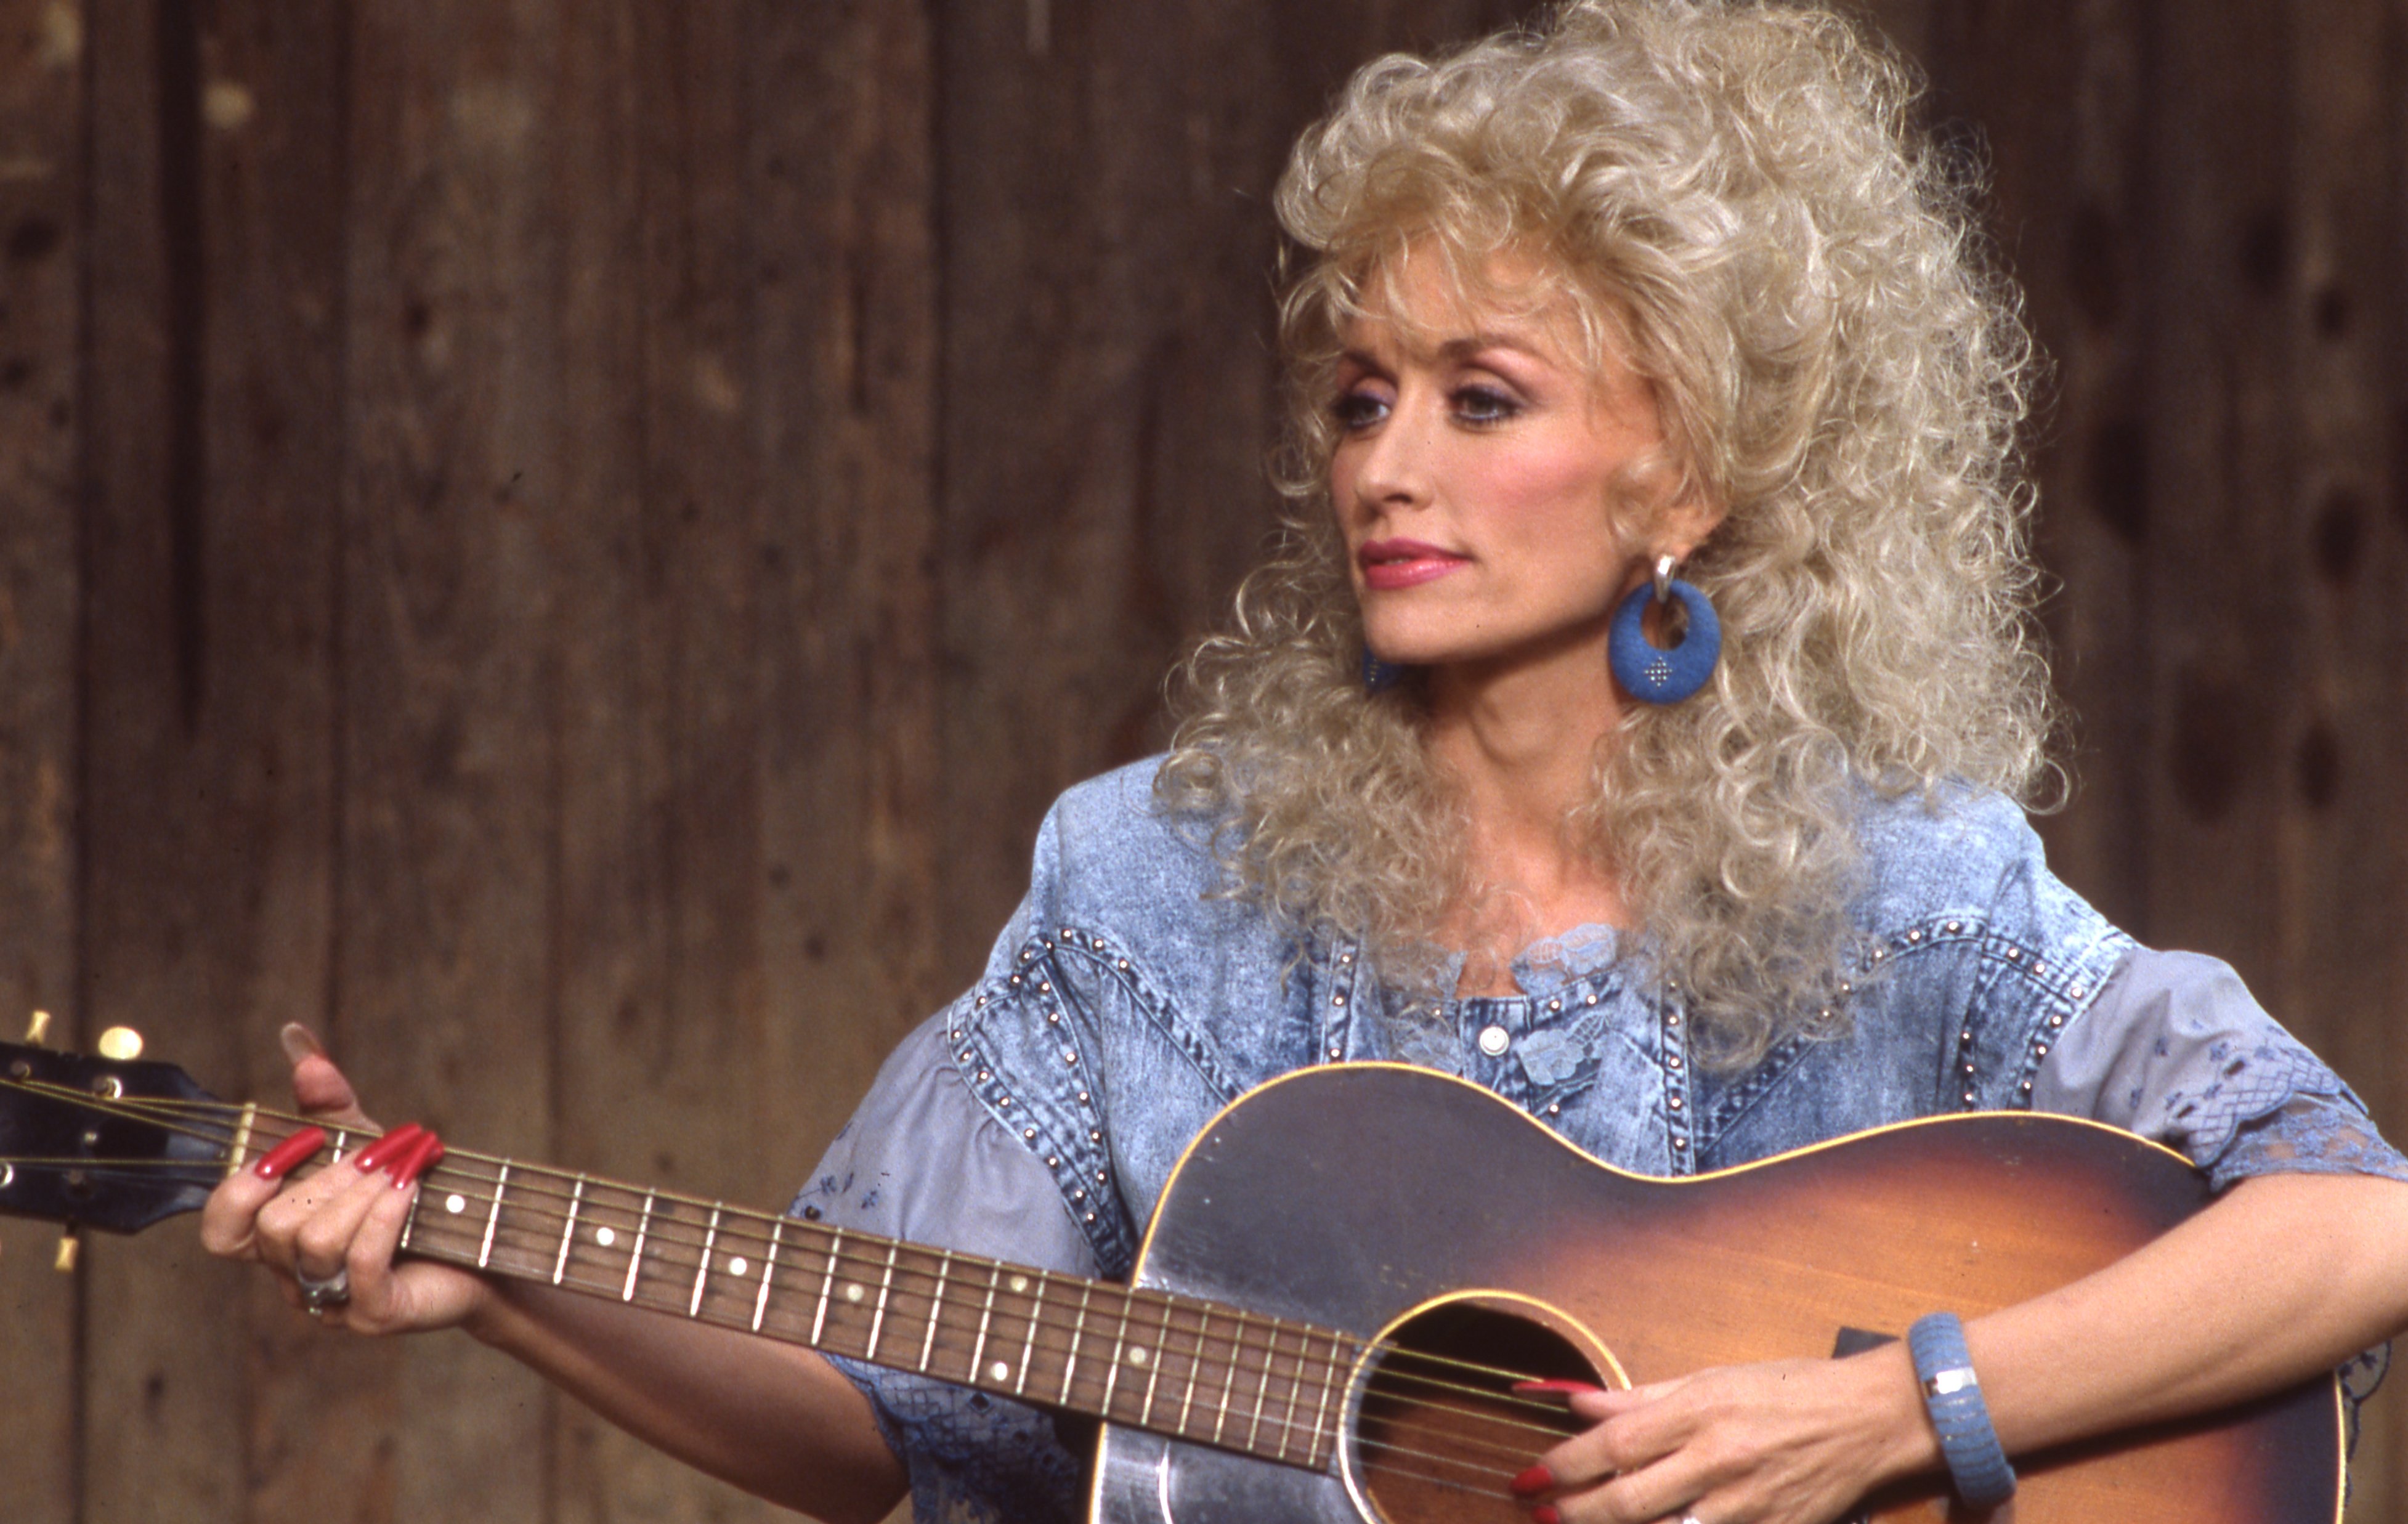 Dolly Parton playing the guitar. Her hair is big and curly. She's wearing a jean shirt, blue earrings, a blue bangle bracelet, and long, red nails.